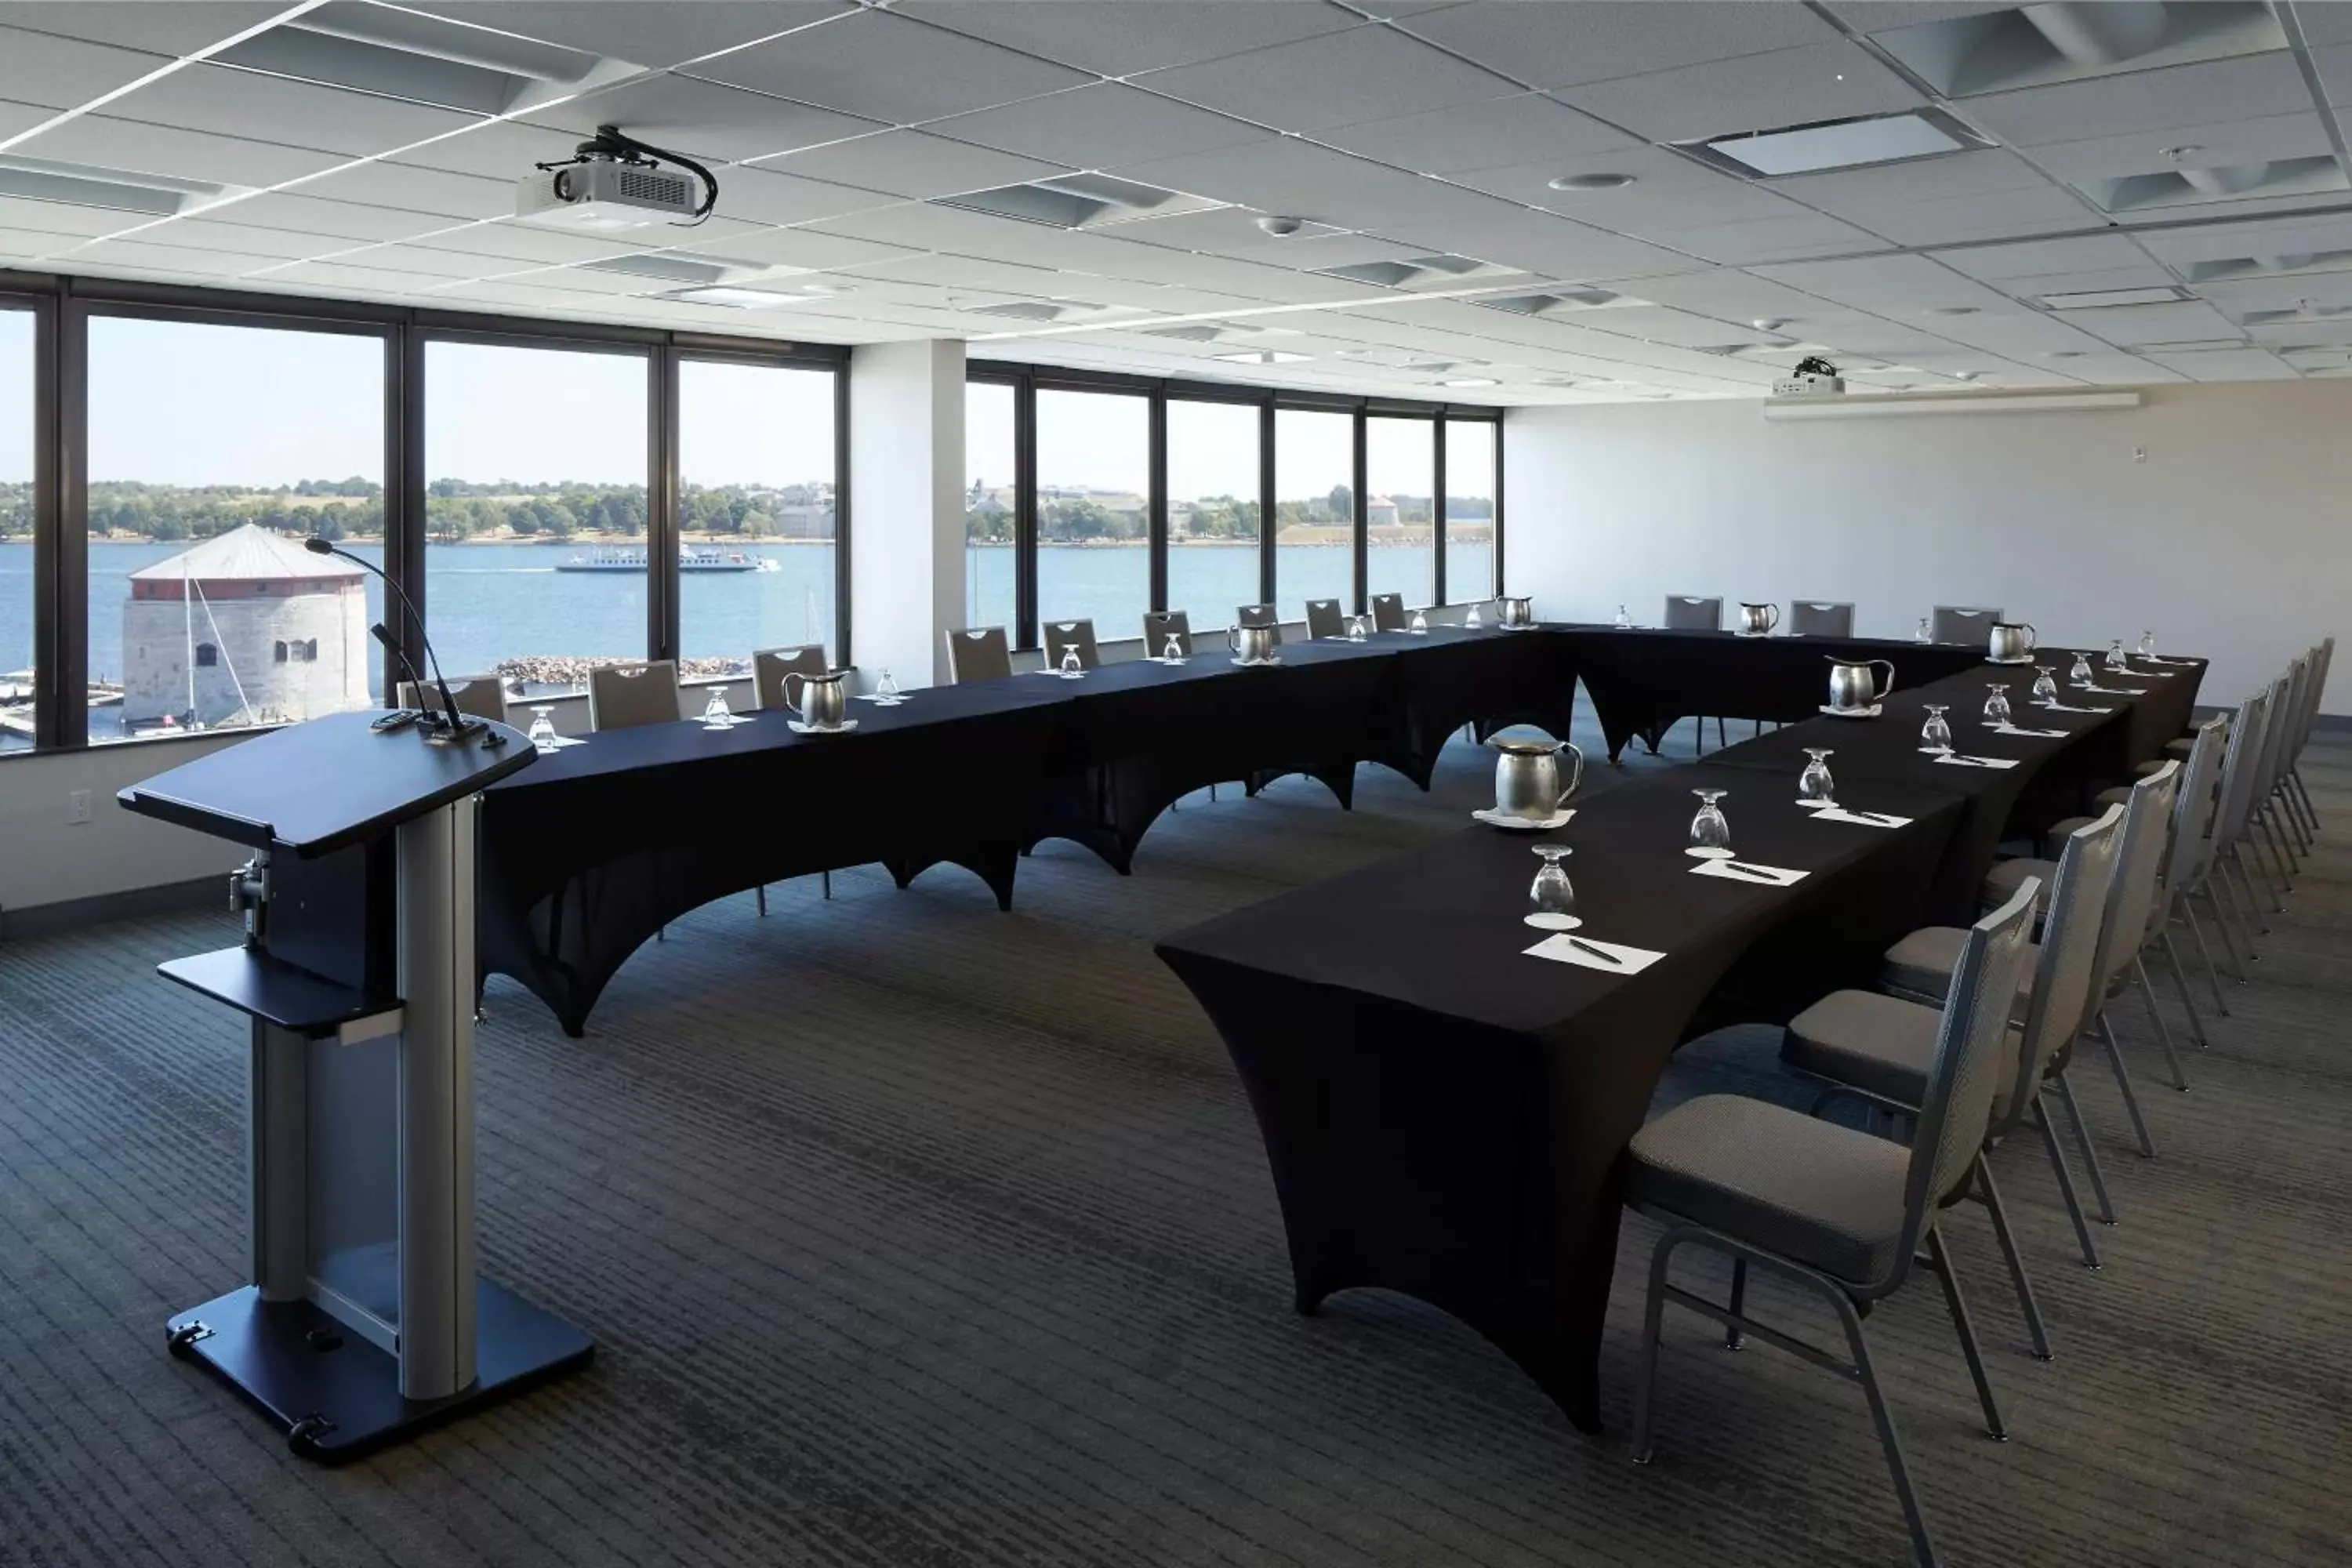 Meeting/conference room in Delta Hotels by Marriott Kingston Waterfront